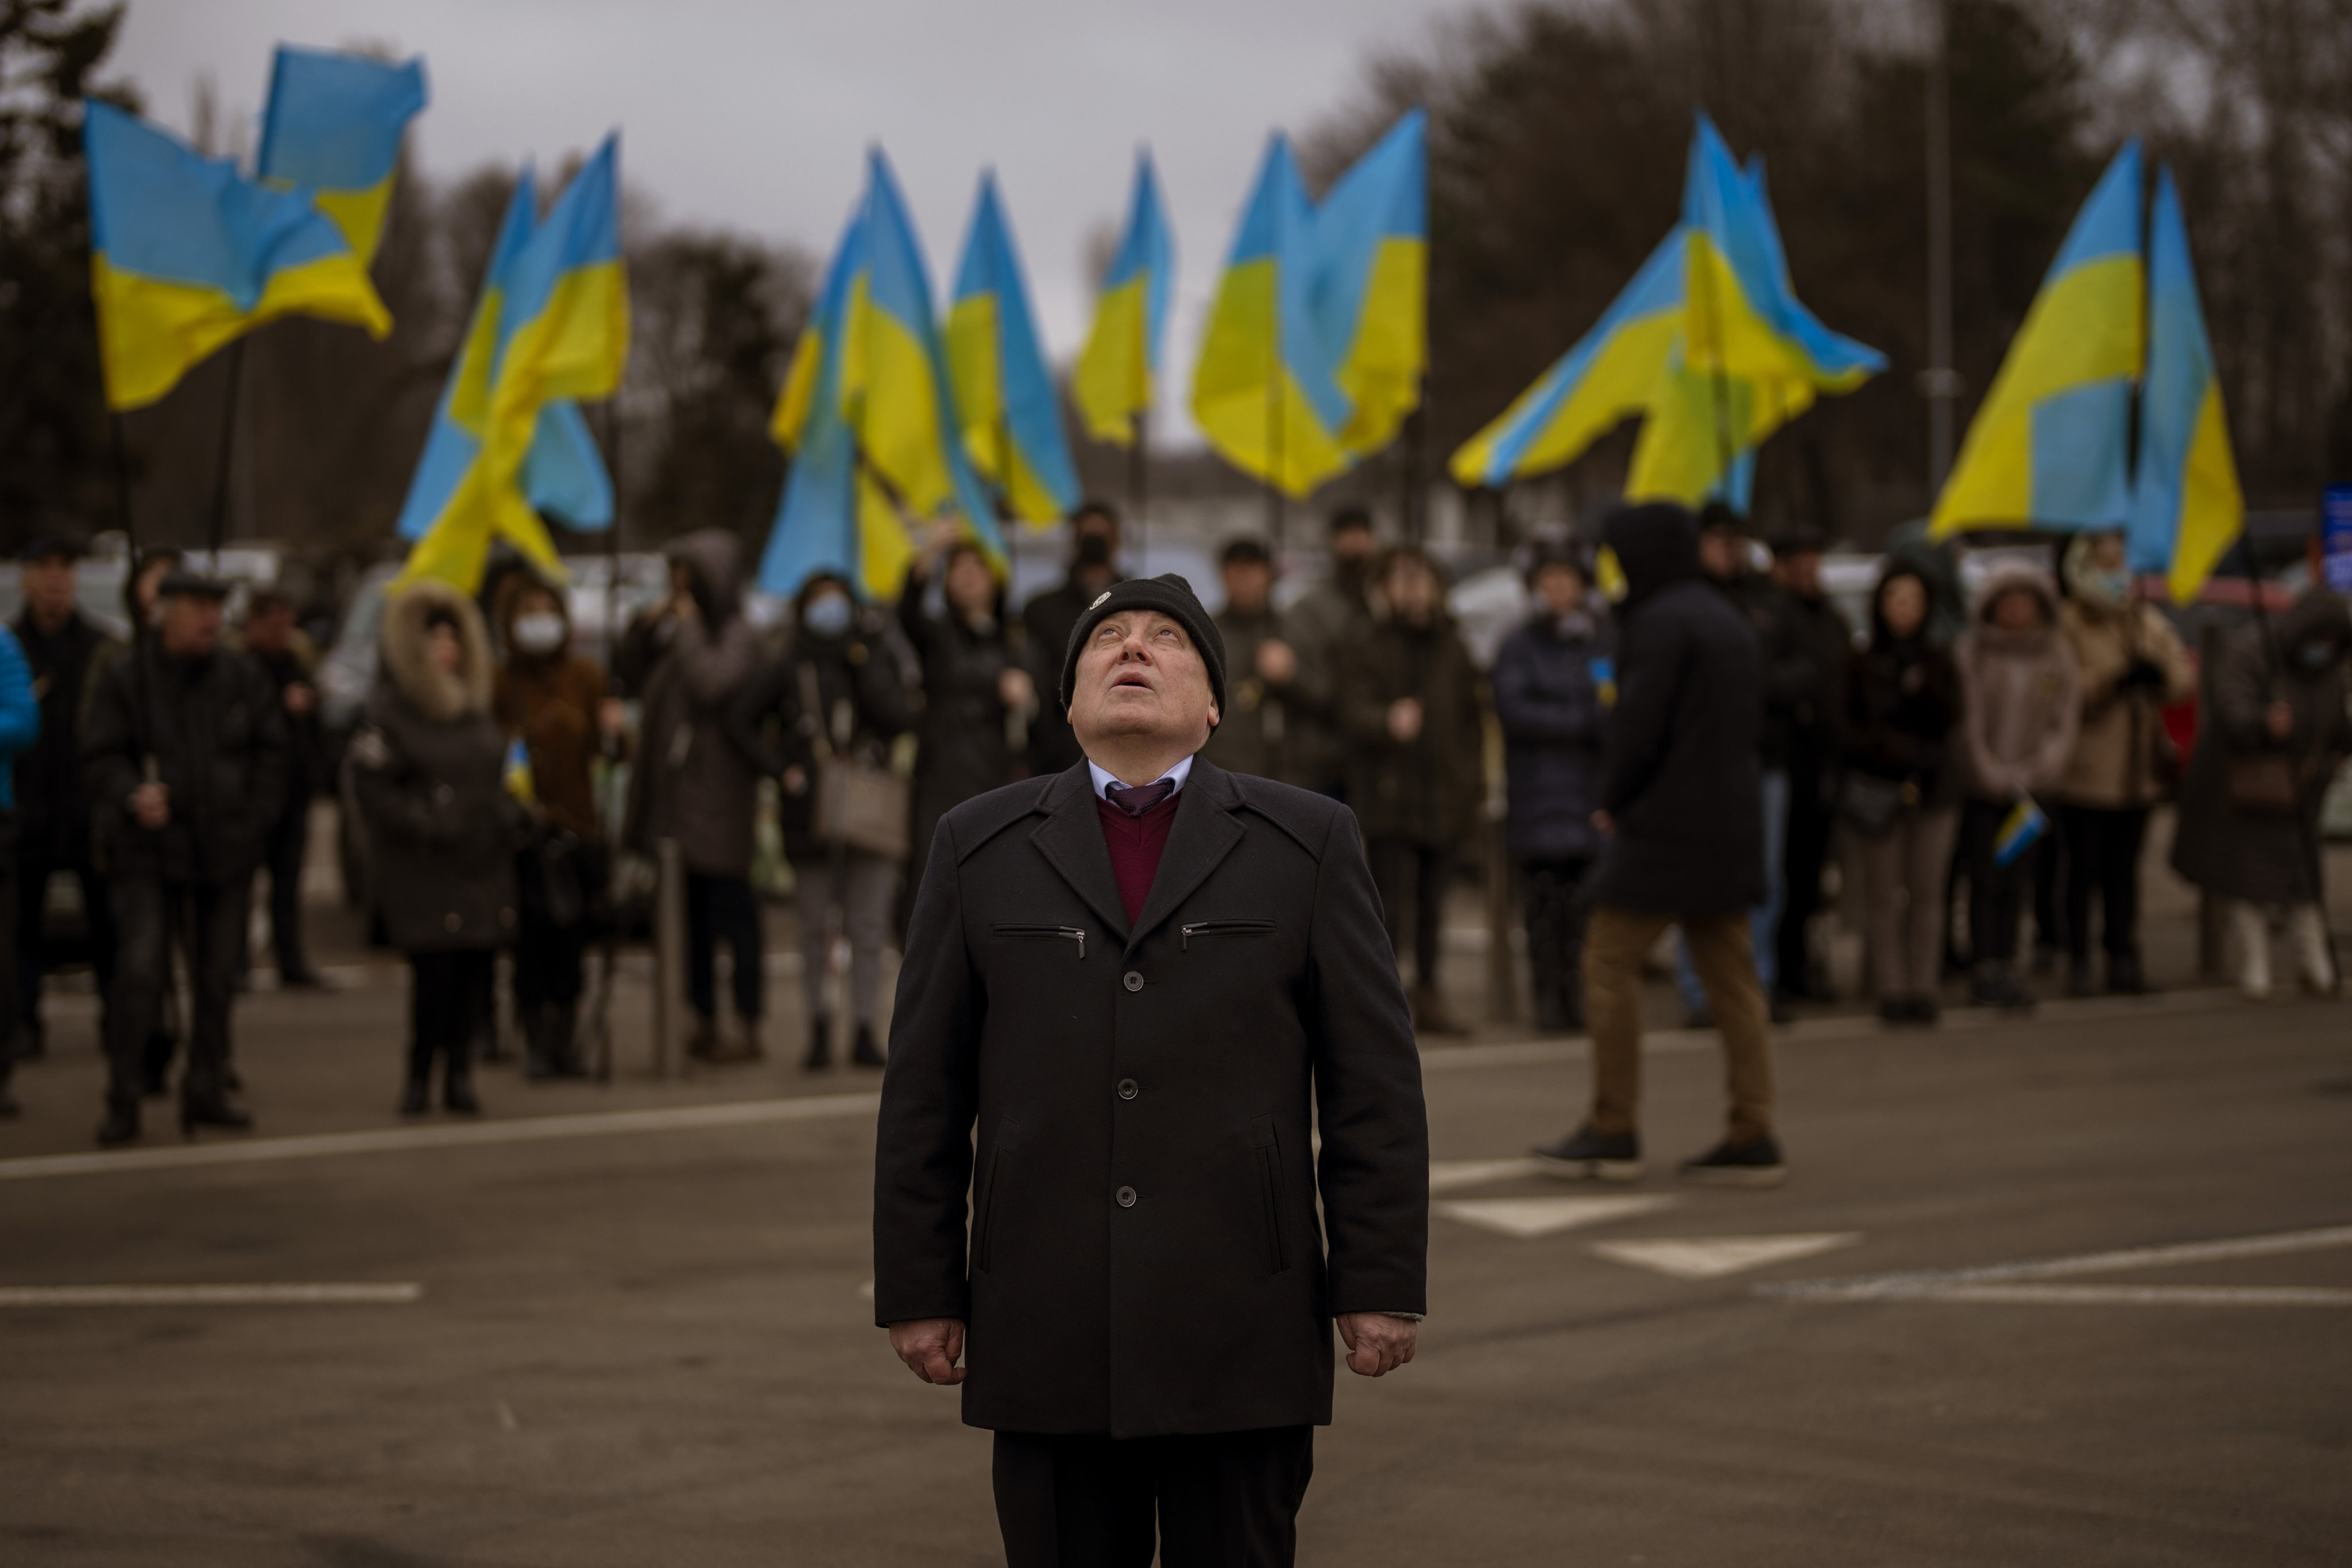 People gather to celebrate a Day of Unity in Odessa, Ukraine, on February 16, as the threat of a Russian invasion remains a real and present danger. Photo: AP